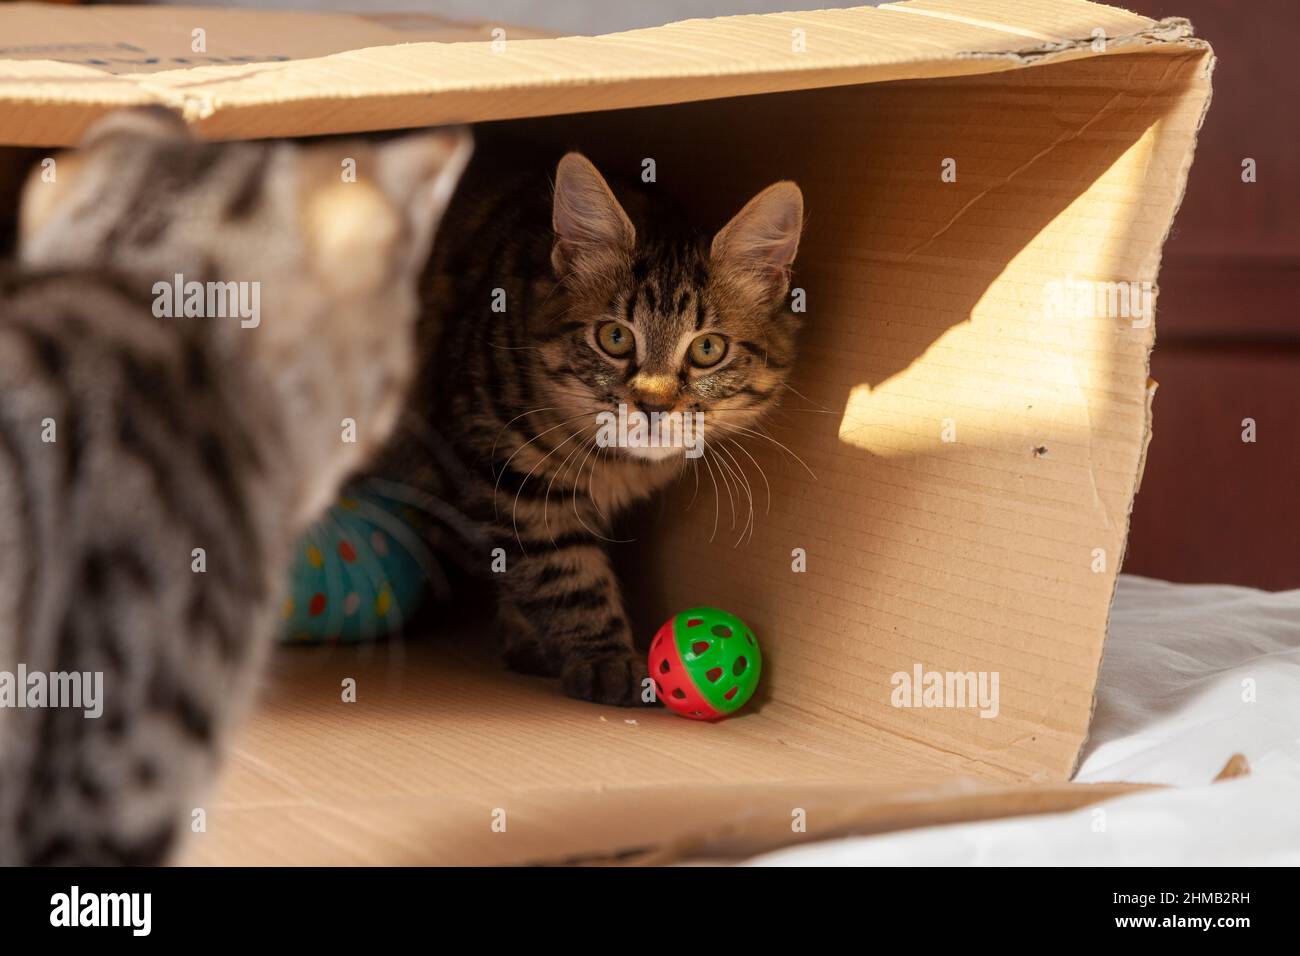 Two kittens playing inside a cardboard box Stock Photo